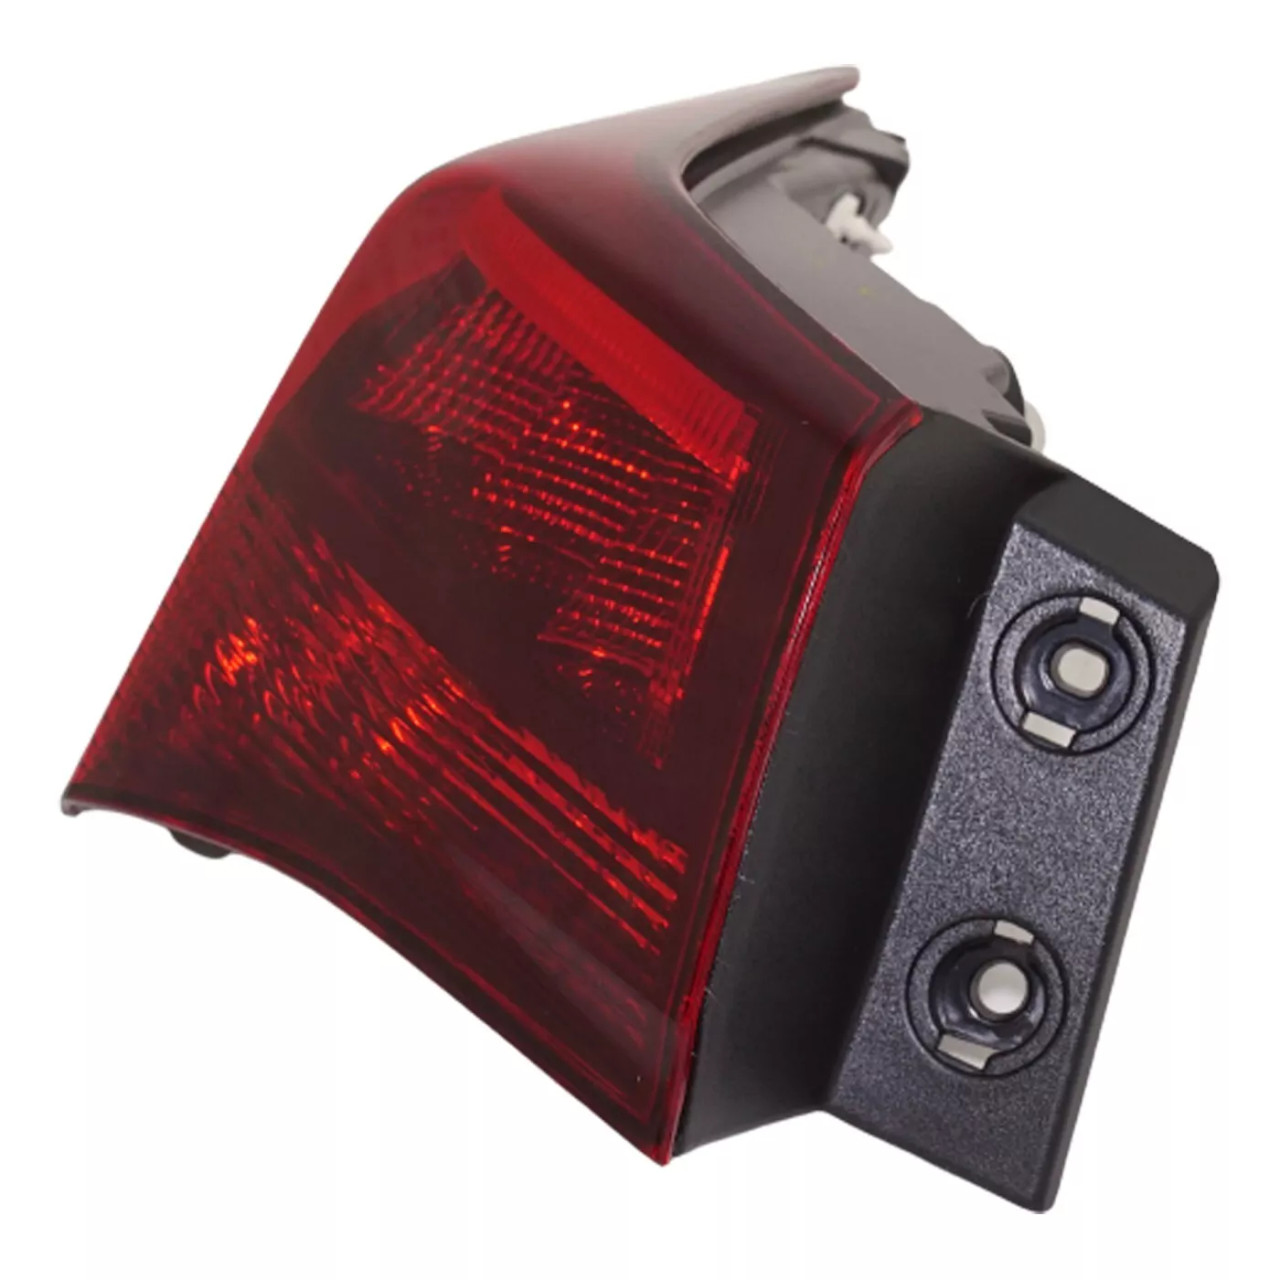 Tail Light Set For 2018-2020 Acura TLX Left and Right Clear Lens Halogen